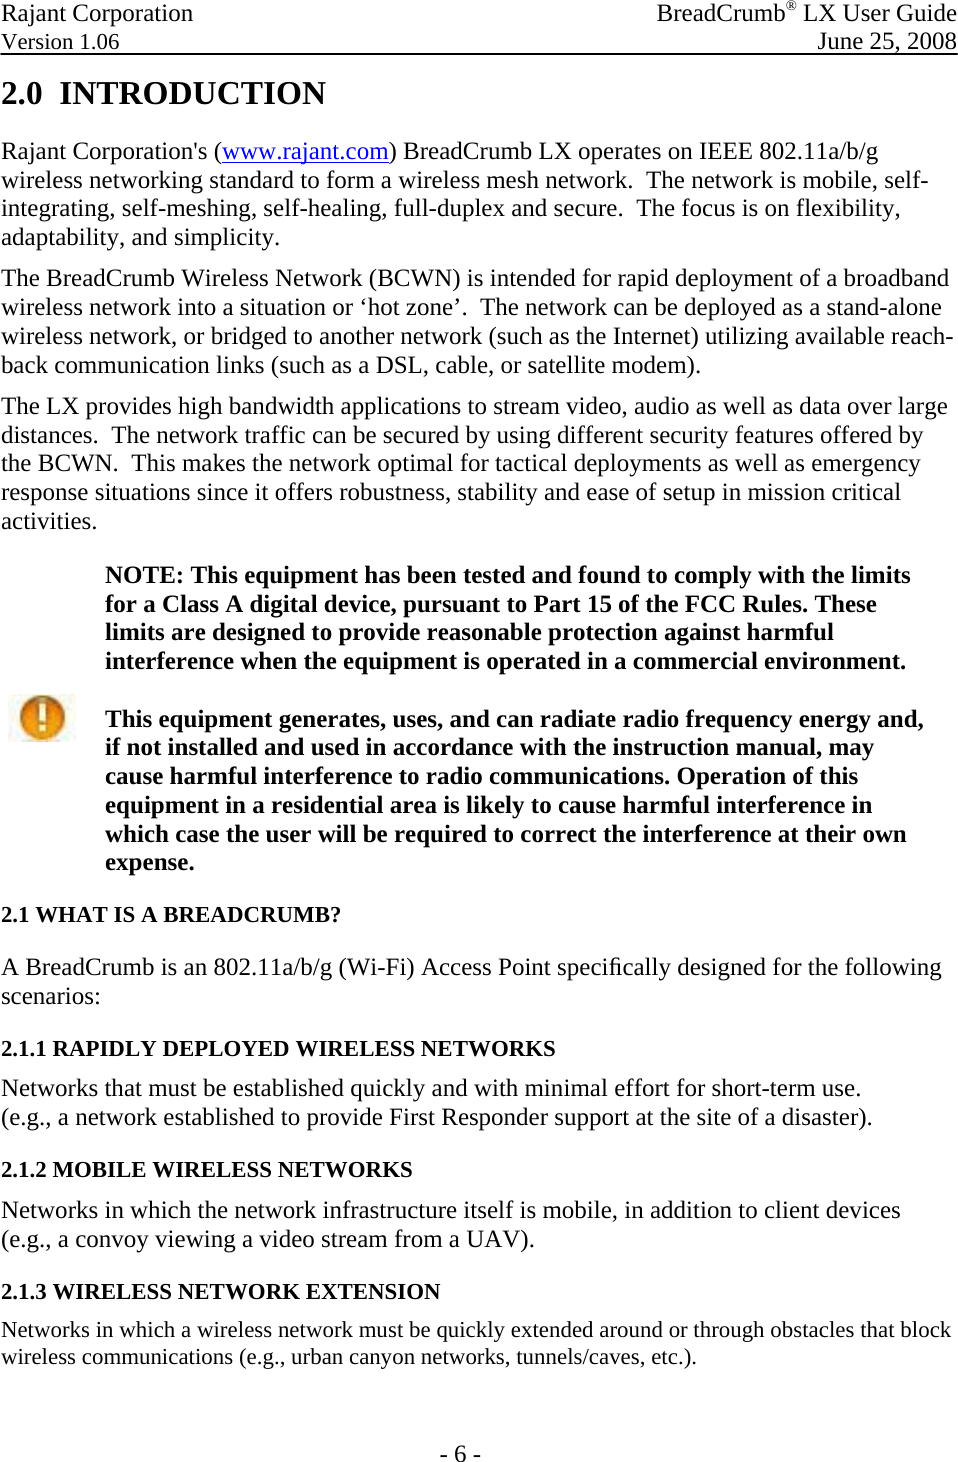 Rajant Corporation   BreadCrumb® LX User Guide Version 1.06  June 25, 2008  - 6 - 2.0  INTRODUCTION Rajant Corporation&apos;s (www.rajant.com) BreadCrumb LX operates on IEEE 802.11a/b/g wireless networking standard to form a wireless mesh network.  The network is mobile, self-integrating, self-meshing, self-healing, full-duplex and secure.  The focus is on flexibility, adaptability, and simplicity. The BreadCrumb Wireless Network (BCWN) is intended for rapid deployment of a broadband wireless network into a situation or ‘hot zone’.  The network can be deployed as a stand-alone wireless network, or bridged to another network (such as the Internet) utilizing available reach-back communication links (such as a DSL, cable, or satellite modem). The LX provides high bandwidth applications to stream video, audio as well as data over large distances.  The network traffic can be secured by using different security features offered by the BCWN.  This makes the network optimal for tactical deployments as well as emergency response situations since it offers robustness, stability and ease of setup in mission critical activities.   NOTE: This equipment has been tested and found to comply with the limits for a Class A digital device, pursuant to Part 15 of the FCC Rules. These limits are designed to provide reasonable protection against harmful interference when the equipment is operated in a commercial environment.  This equipment generates, uses, and can radiate radio frequency energy and, if not installed and used in accordance with the instruction manual, may cause harmful interference to radio communications. Operation of this equipment in a residential area is likely to cause harmful interference in which case the user will be required to correct the interference at their own expense. 2.1 WHAT IS A BREADCRUMB?  A BreadCrumb is an 802.11a/b/g (Wi-Fi) Access Point speciﬁcally designed for the following scenarios:  2.1.1 RAPIDLY DEPLOYED WIRELESS NETWORKS  Networks that must be established quickly and with minimal effort for short-term use.  (e.g., a network established to provide First Responder support at the site of a disaster). 2.1.2 MOBILE WIRELESS NETWORKS  Networks in which the network infrastructure itself is mobile, in addition to client devices (e.g., a convoy viewing a video stream from a UAV). 2.1.3 WIRELESS NETWORK EXTENSION  Networks in which a wireless network must be quickly extended around or through obstacles that block wireless communications (e.g., urban canyon networks, tunnels/caves, etc.).   